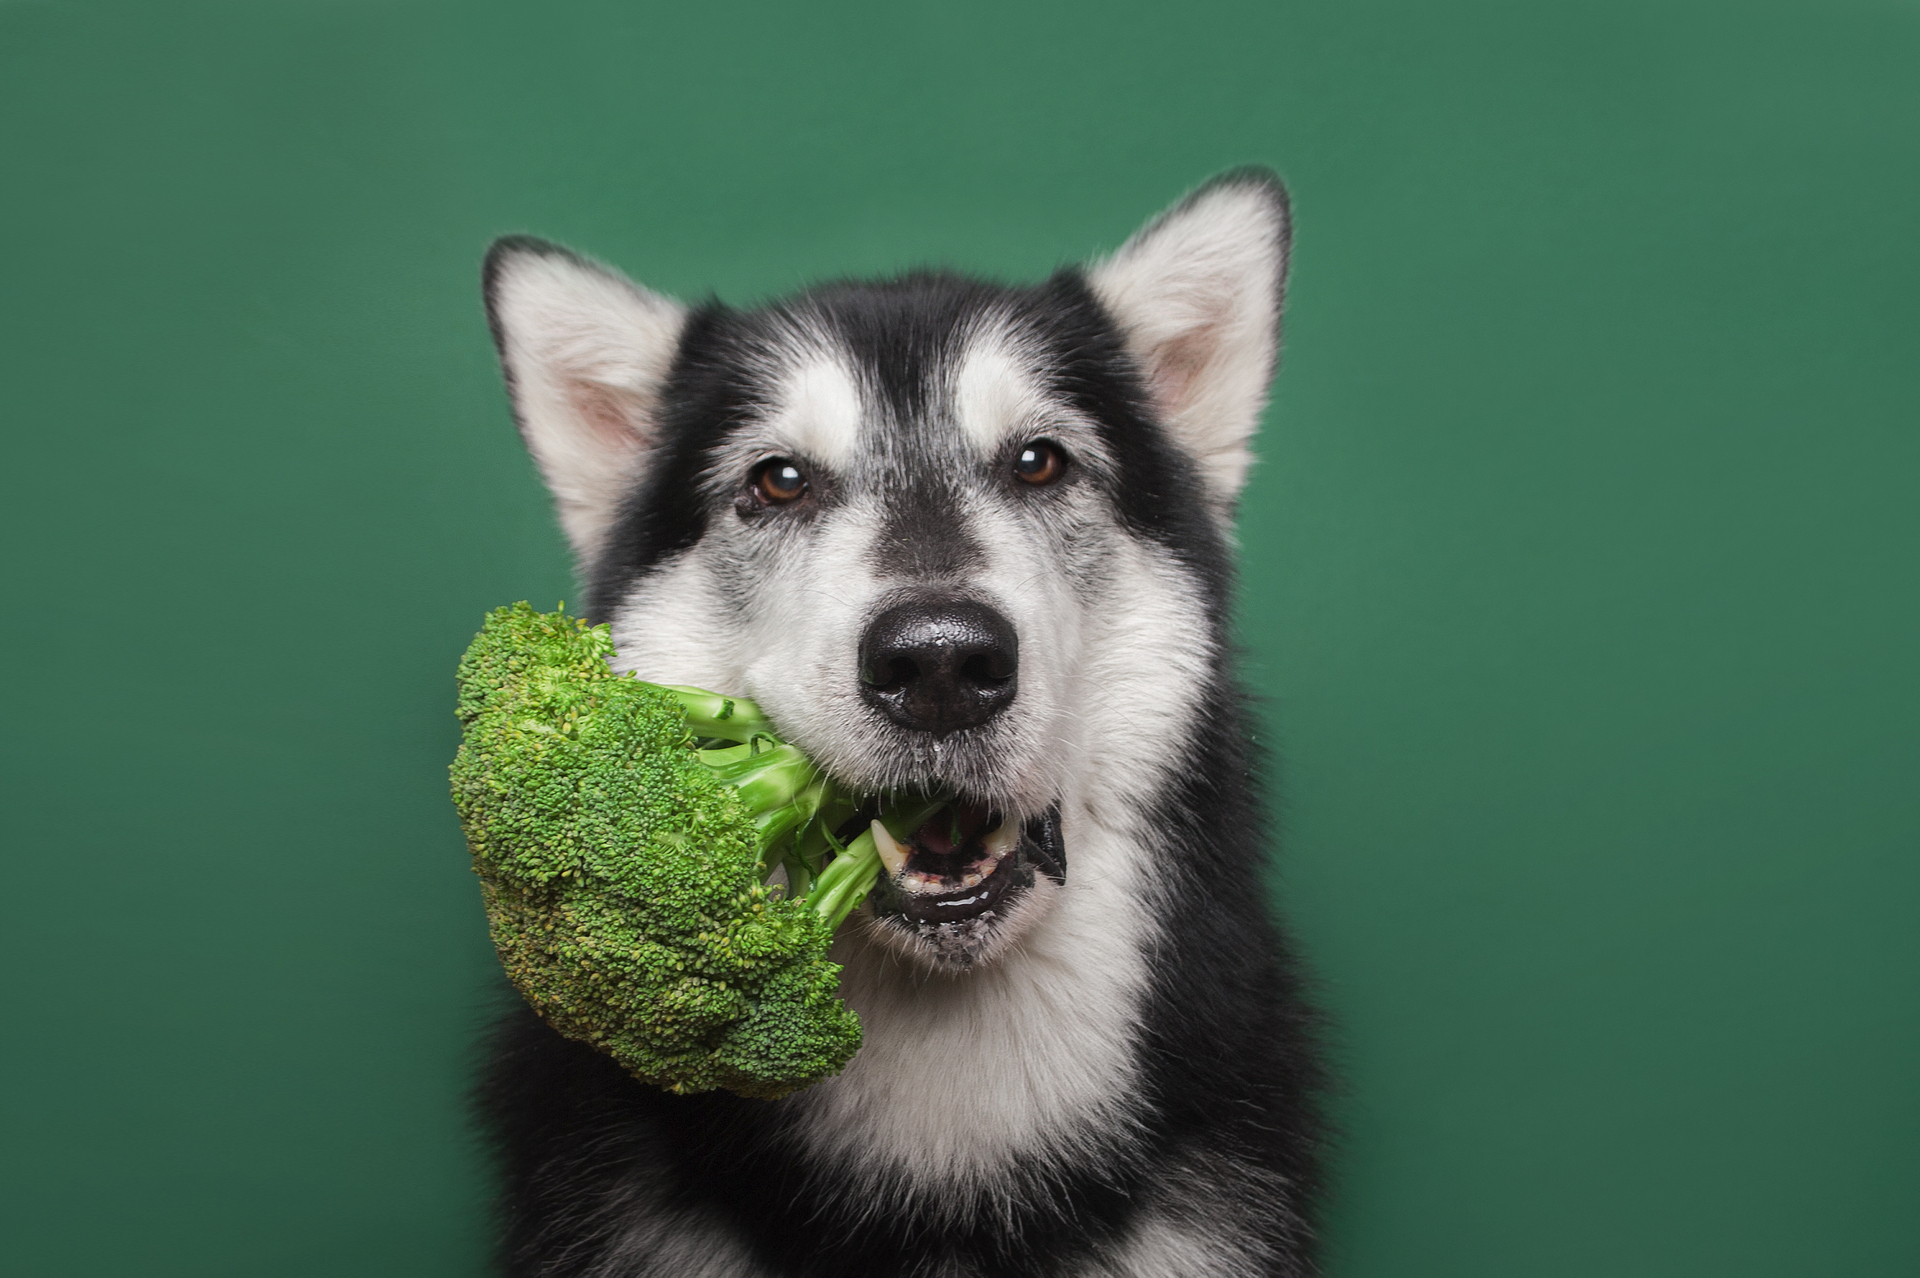 can dogs eat broccoli